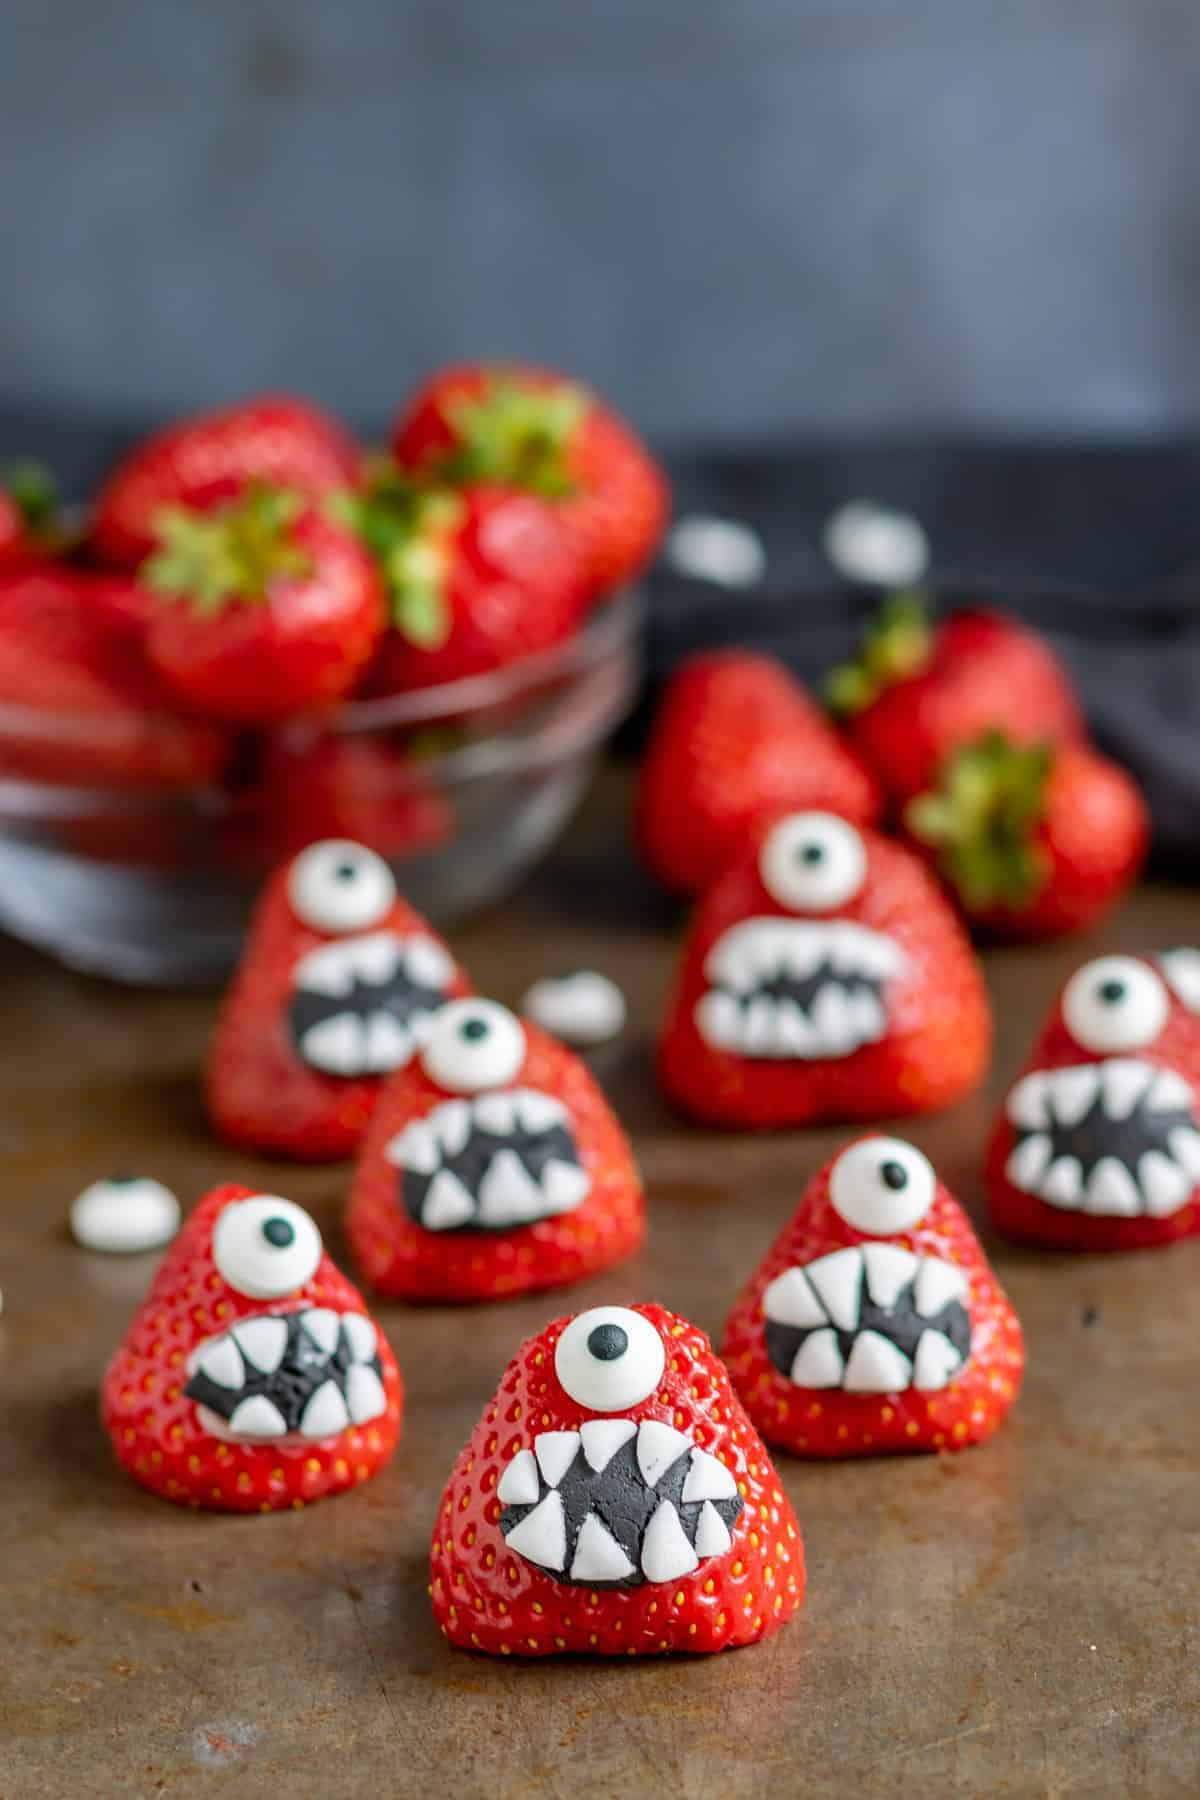 Several strawberries decorated with fondant into Monster-shaped desserts.